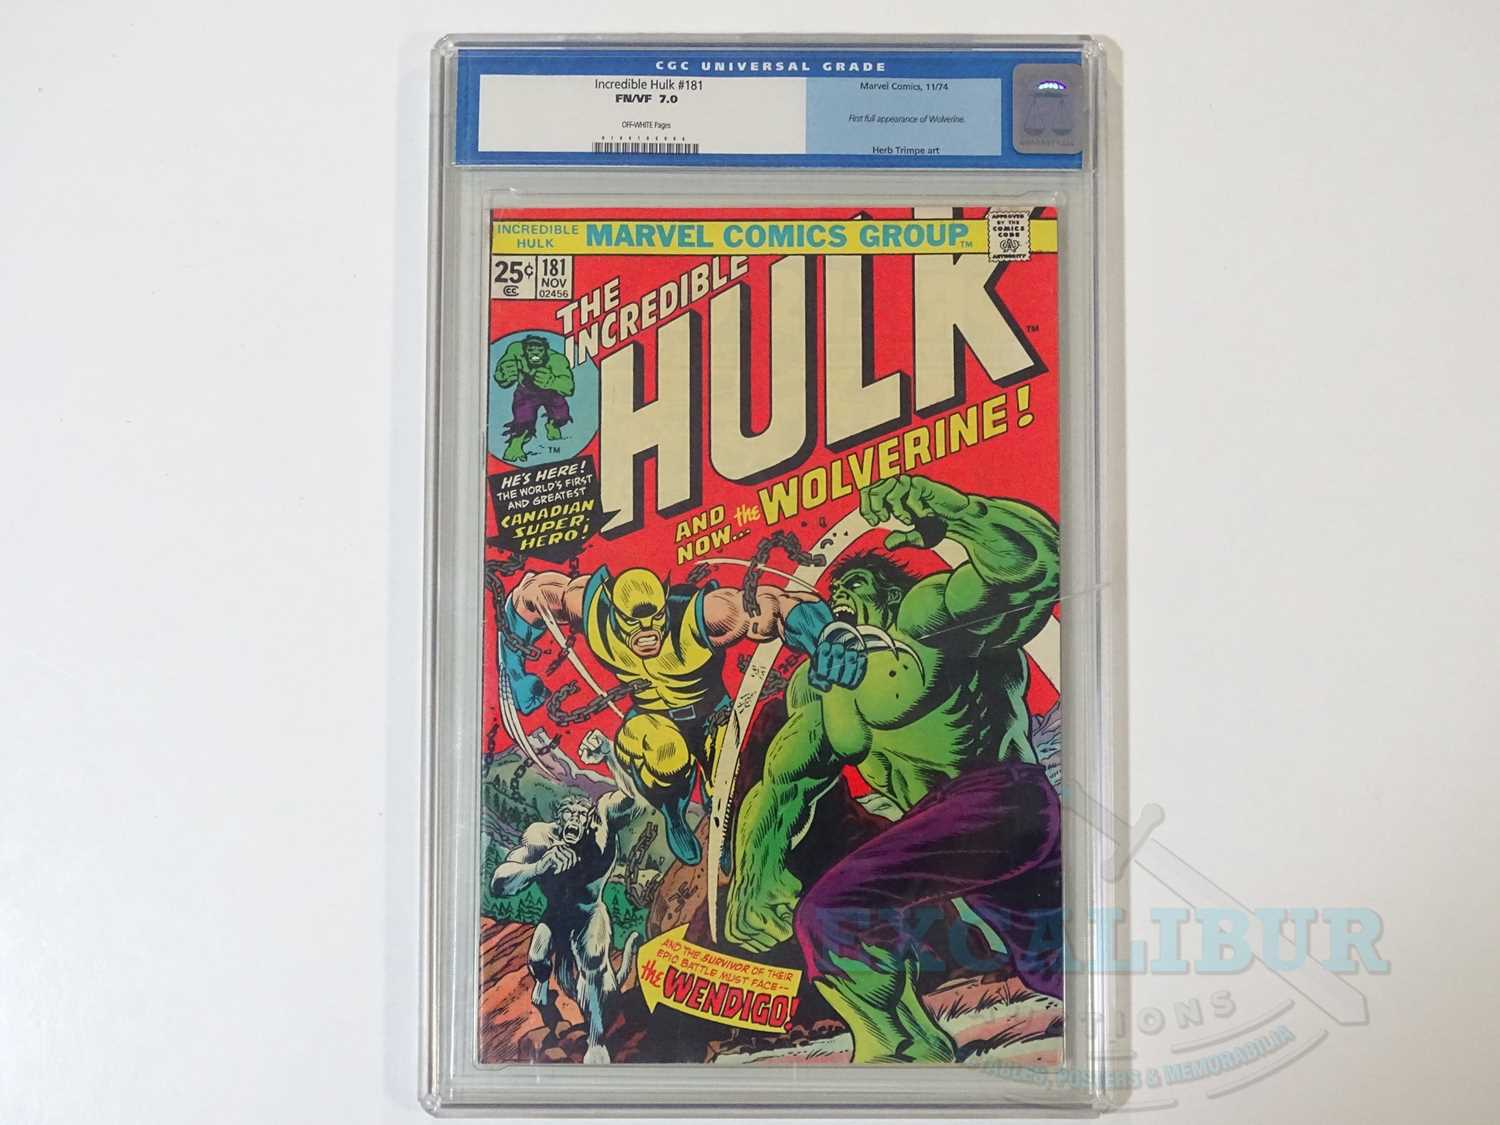 INCREDIBLE HULK #181 (1974 - MARVEL) - GRADED 7.0 (FN/VF) by CGC - First FULL appearance of